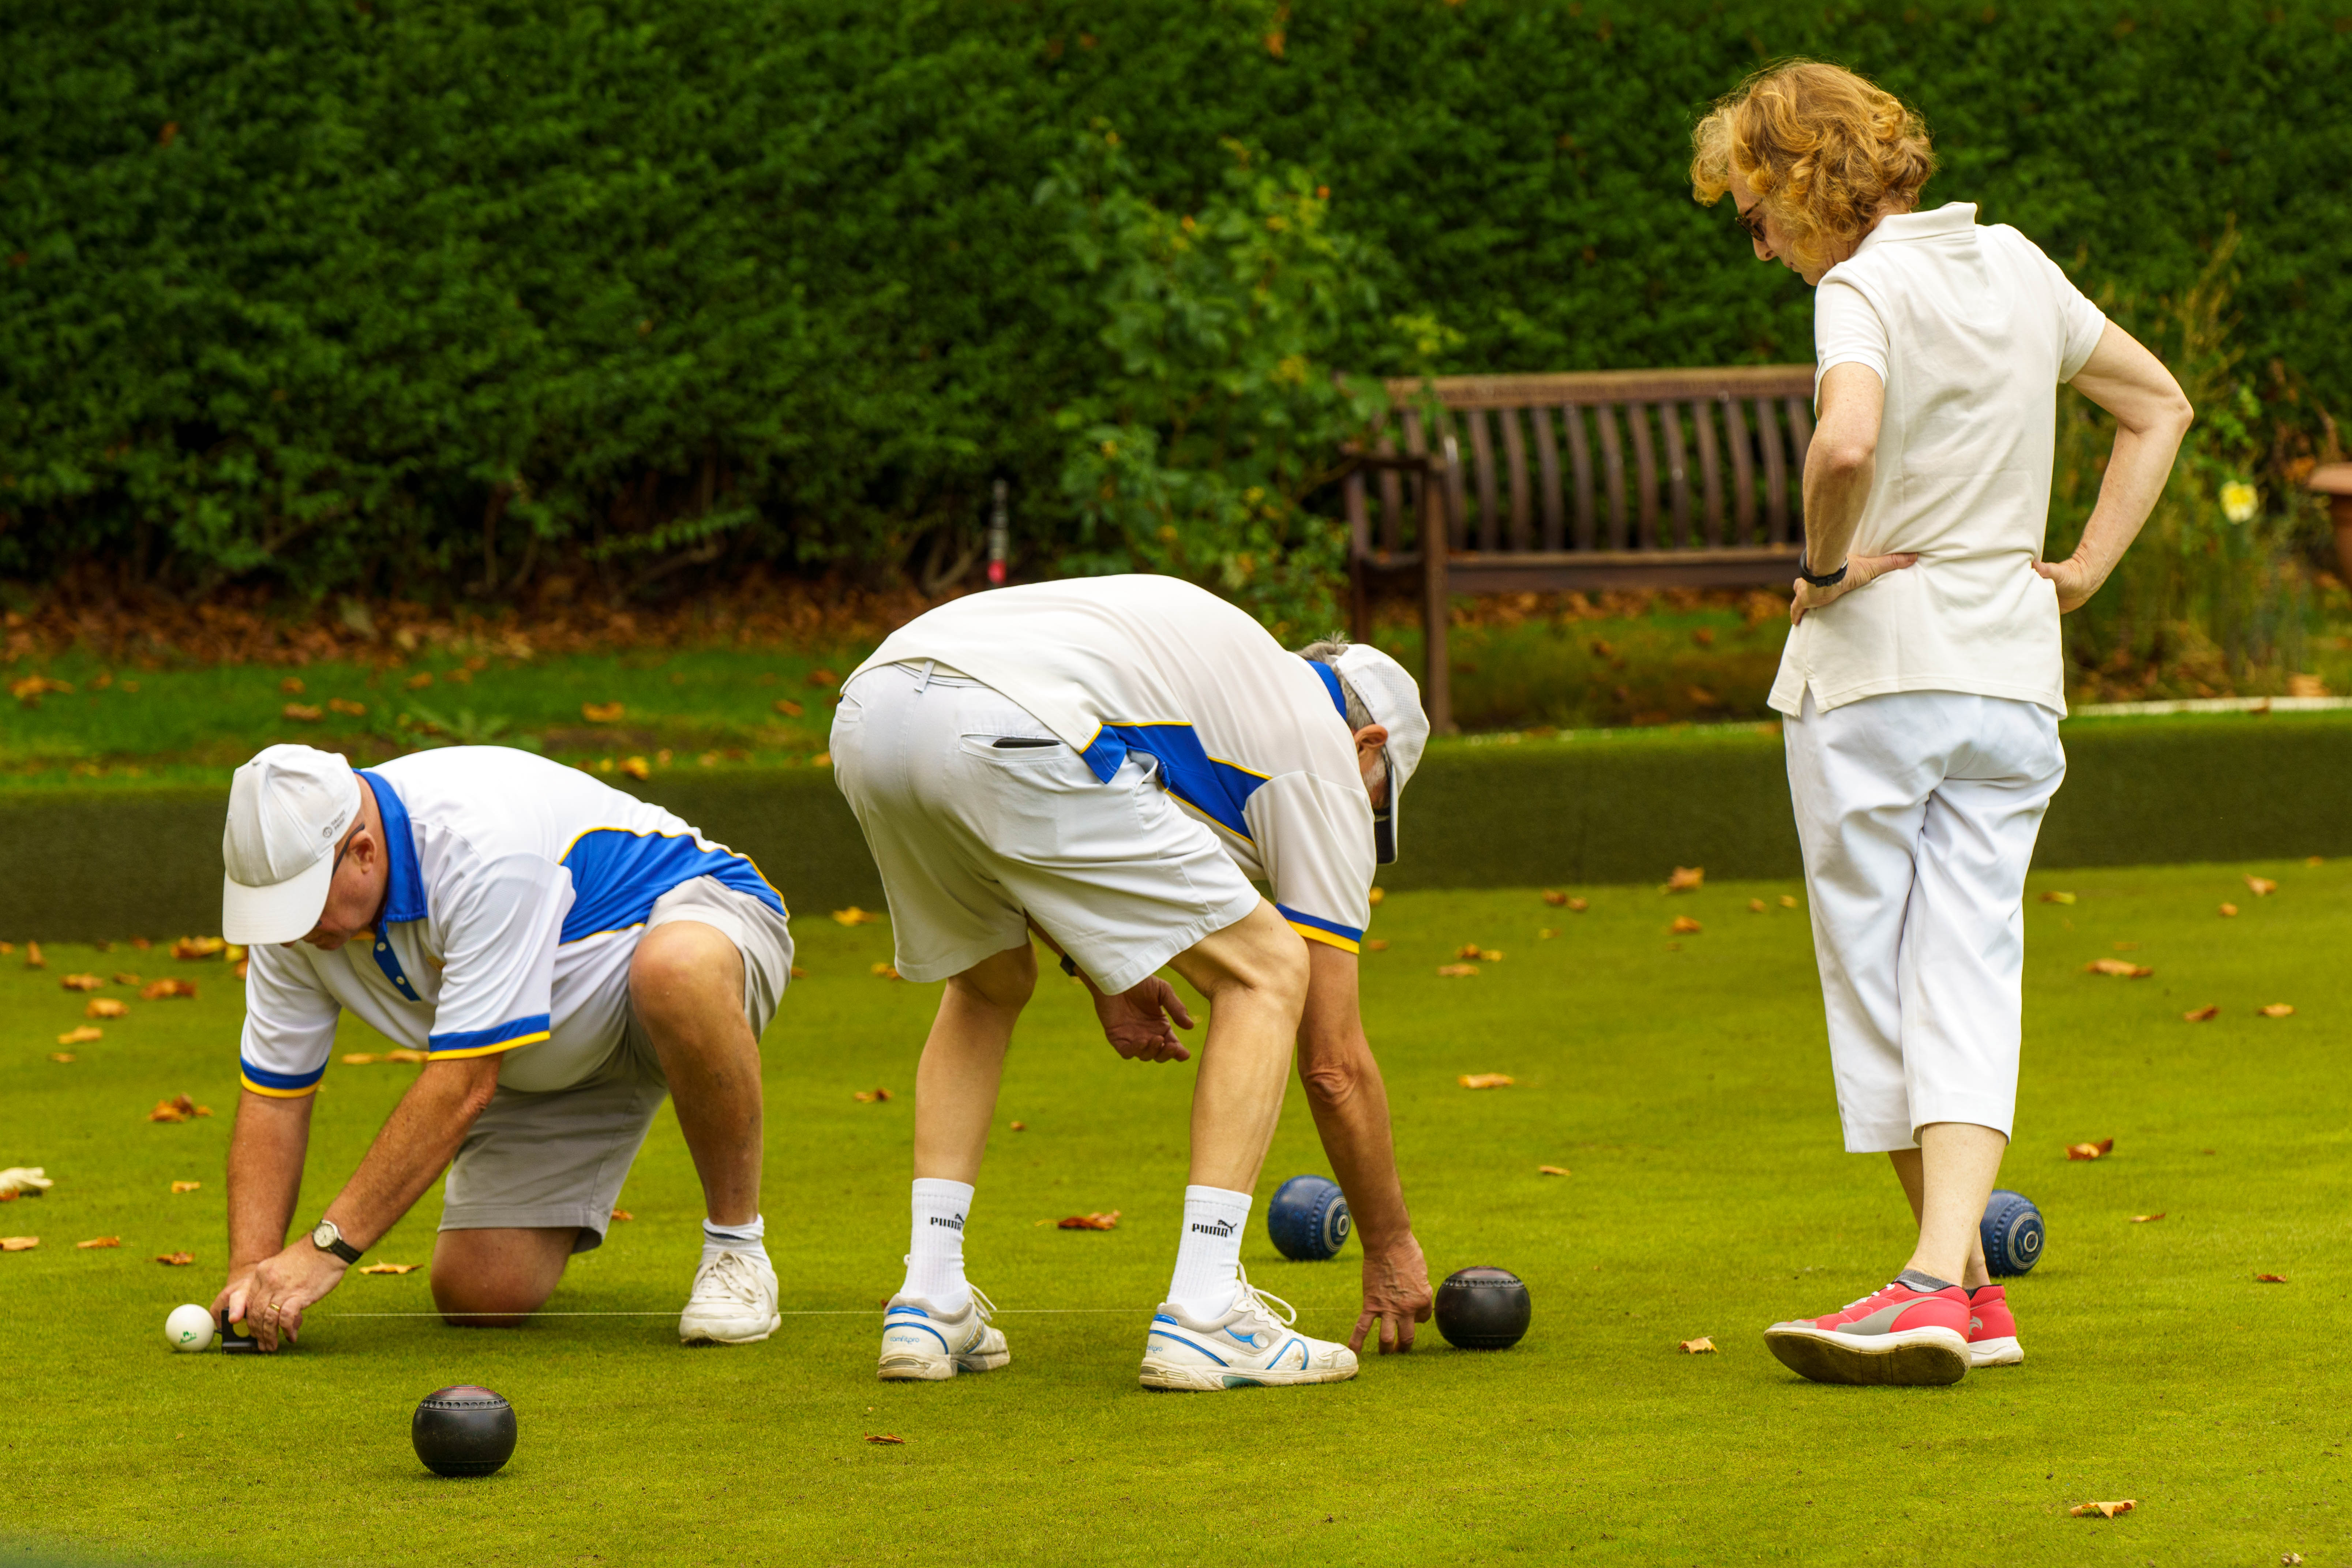 Francis Drake Bowls Club, Hilly Fields, Brockley, SE4 1QE. Gardiners Cup, measuring on last end